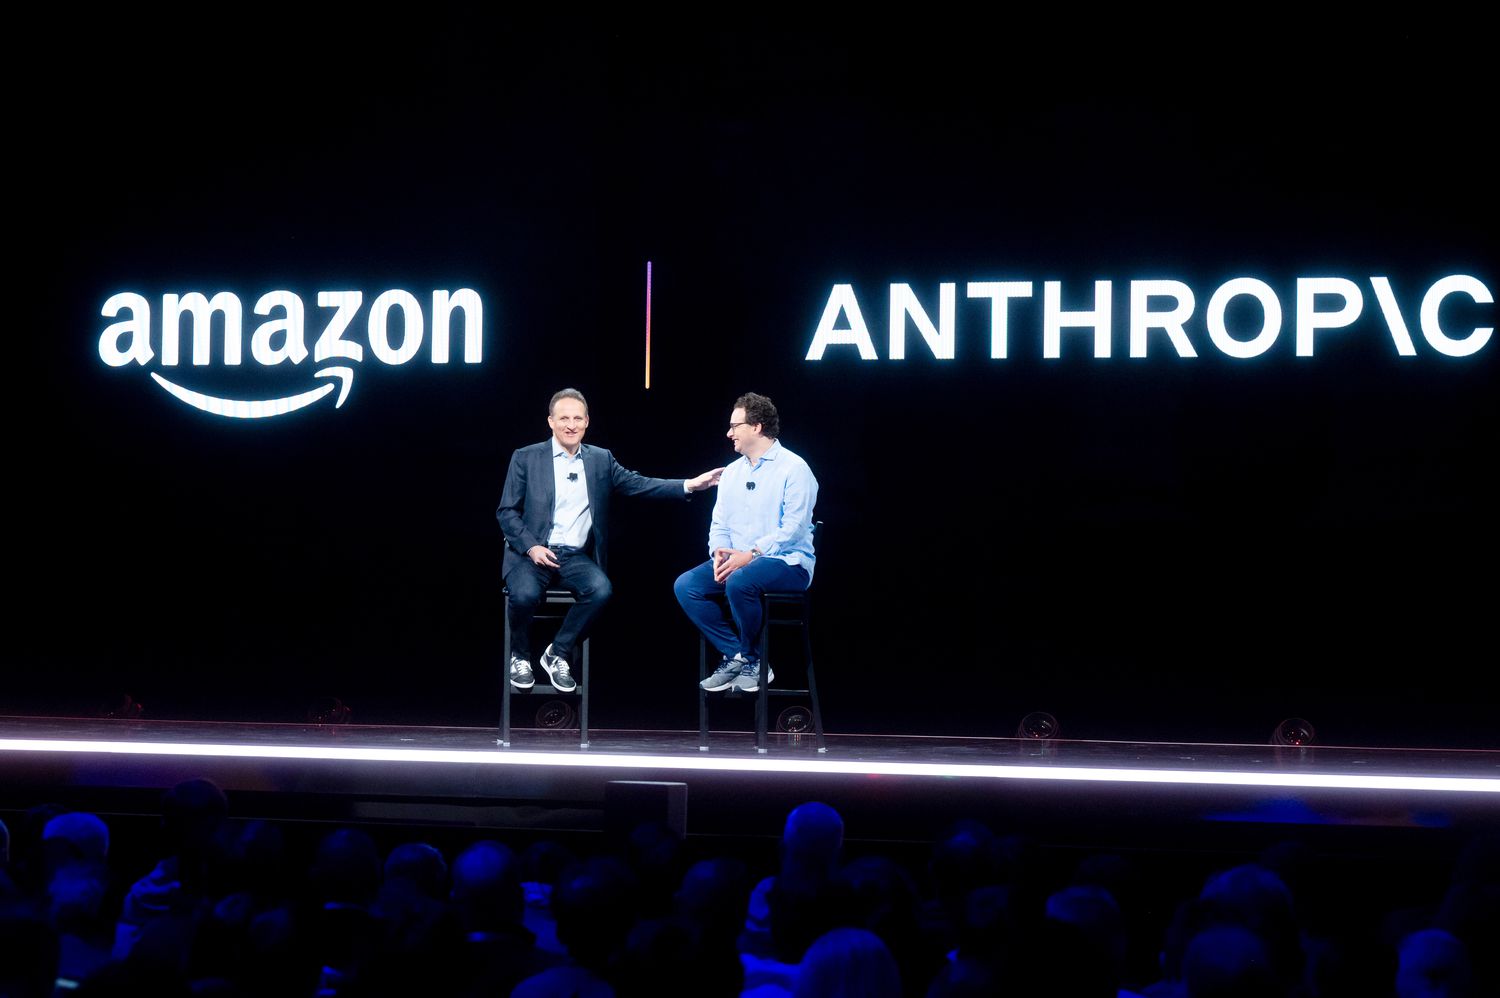 How Anthropic’s New Claude iOS App and Enterprise Plan Could Help Amazon in AI Race [Video]